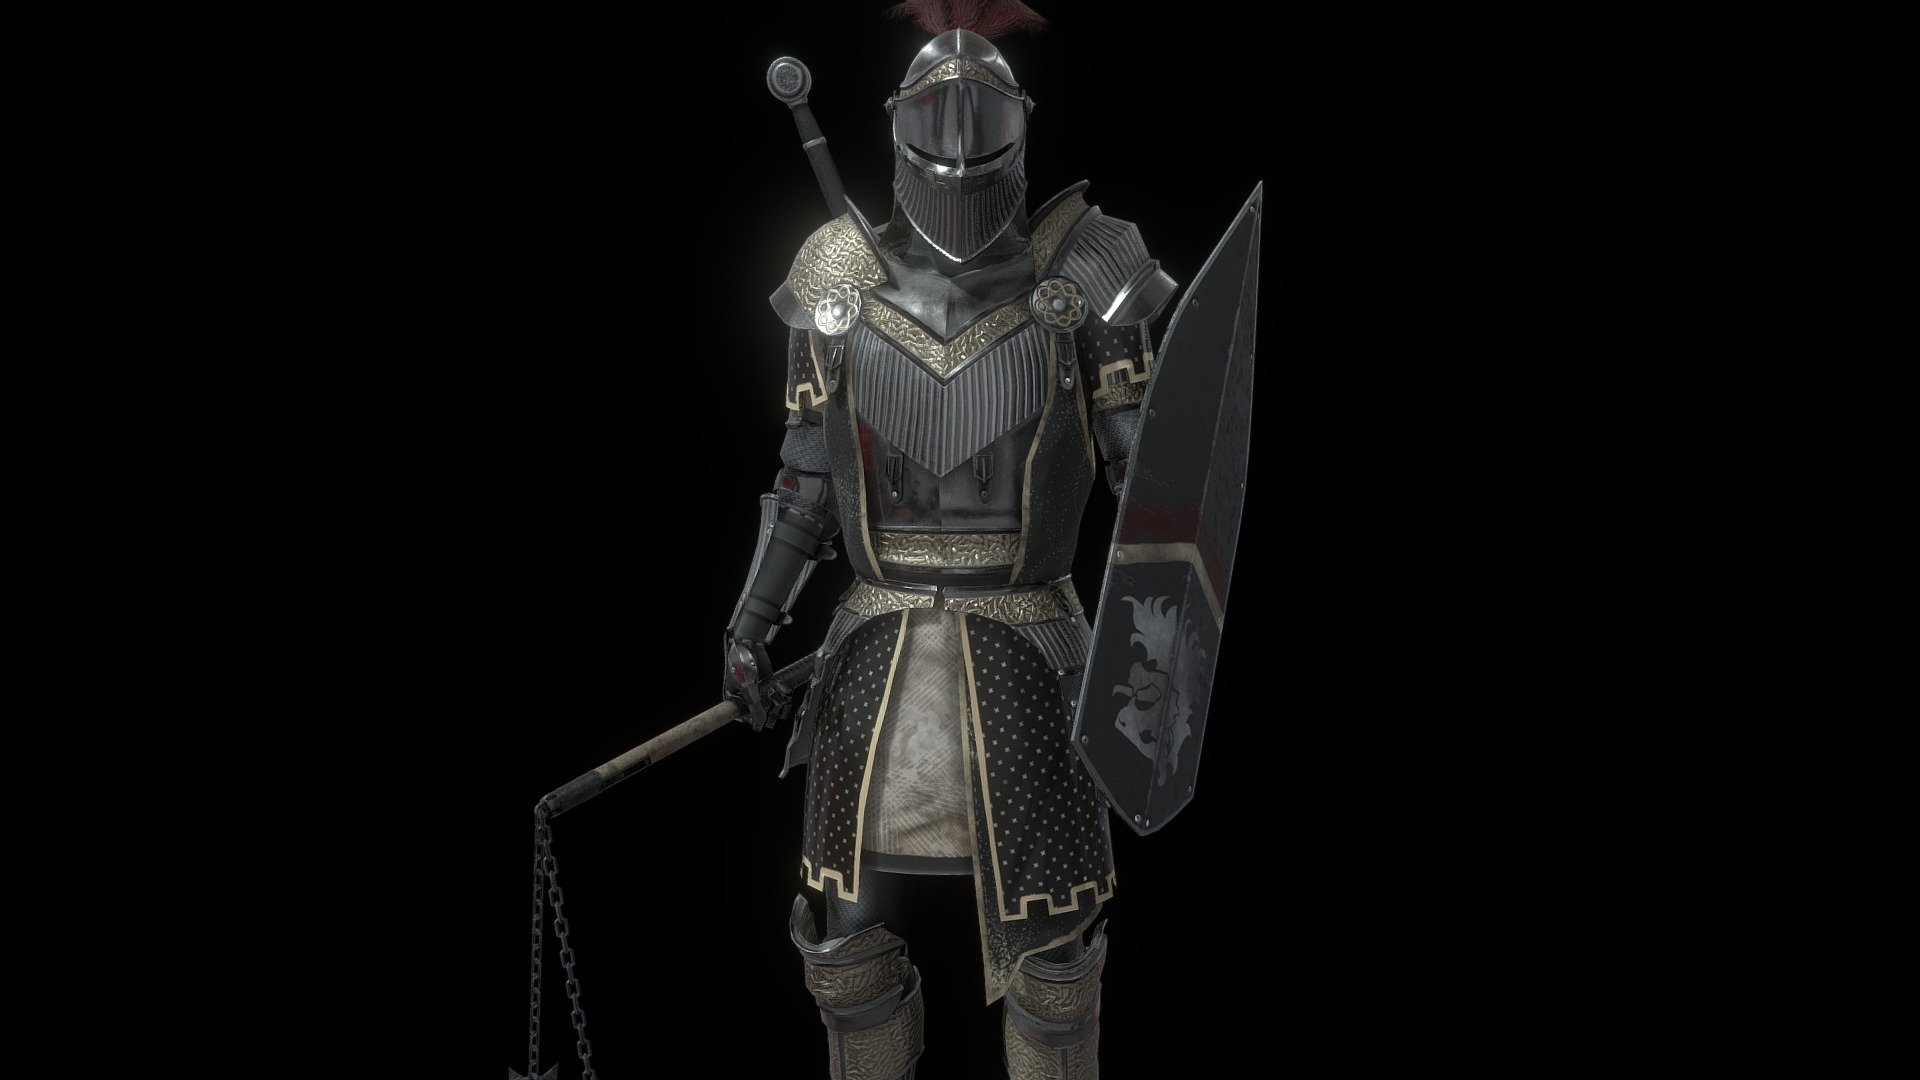 A clothing and armor set designed for my fantasy RPG, Riptide.

40K per armor set fully armed. I'd like to reduce the poly count, and have the embossed markings more symbolic of Ydanian culture, so this design of the Highlander Black Knight is still a work in progress.

Please visit and support my life-long creation, Riptide 3d model